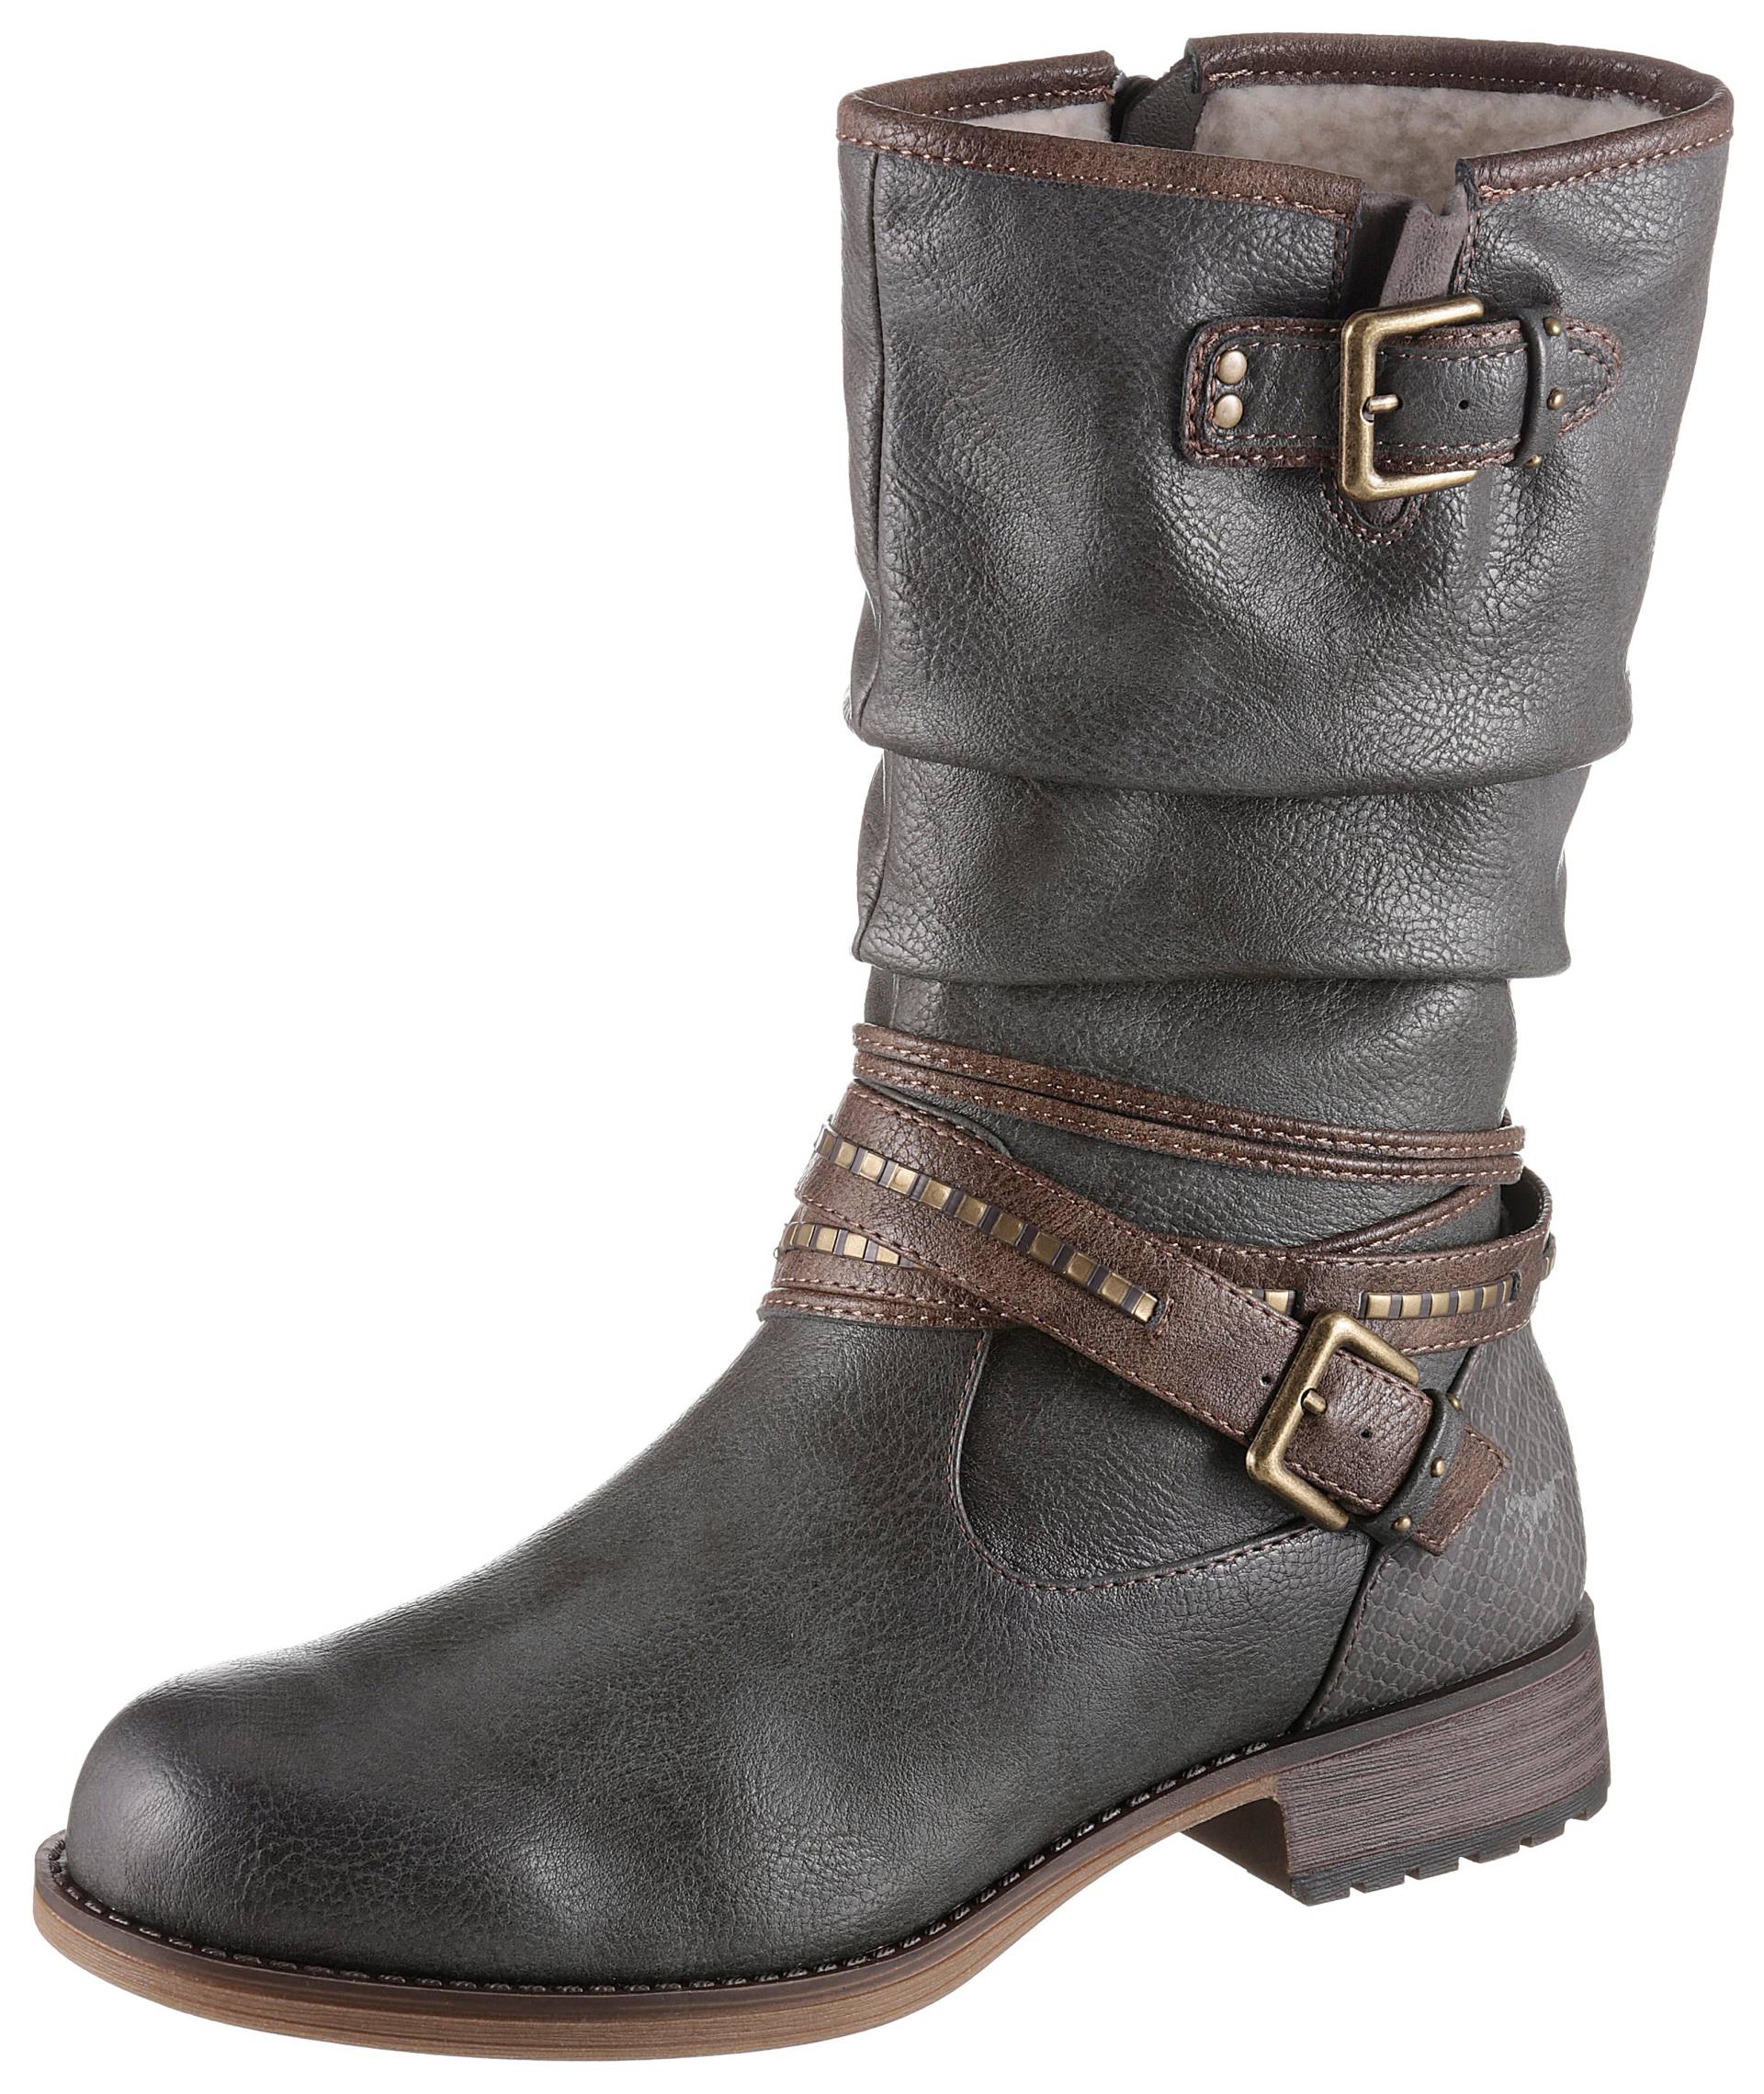 Mustang Shoes Winterstiefel von Mustang Shoes